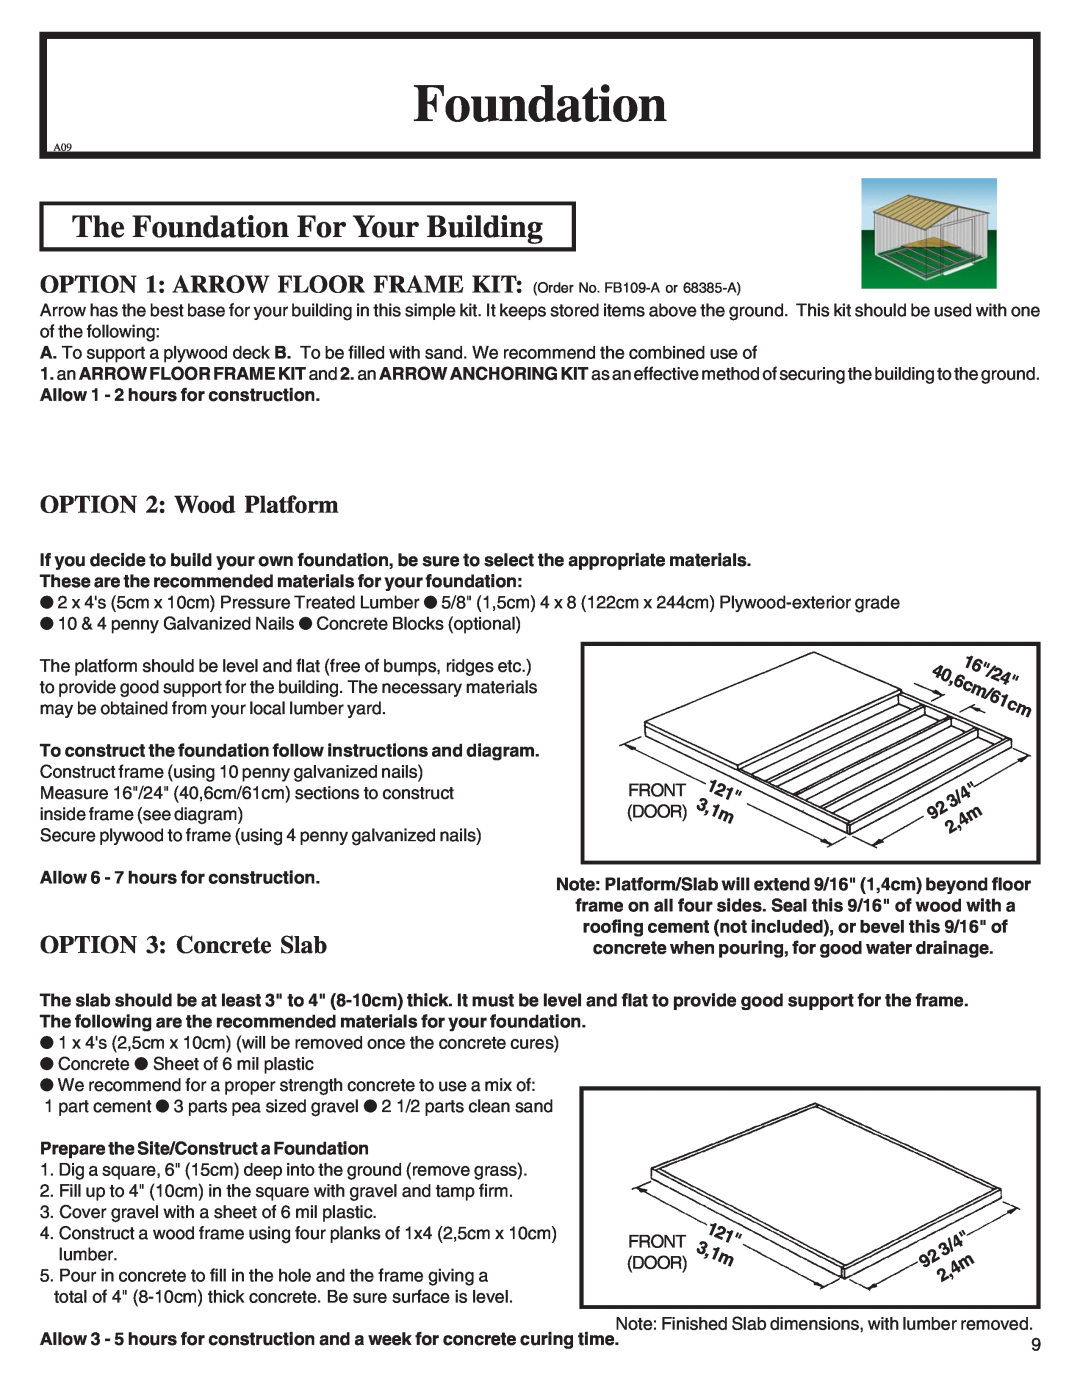 Arrow Plastic NW108-A The Foundation For Your Building, OPTION 1 ARROW FLOOR FRAME KIT Order No. FB109-A or 68385-A 